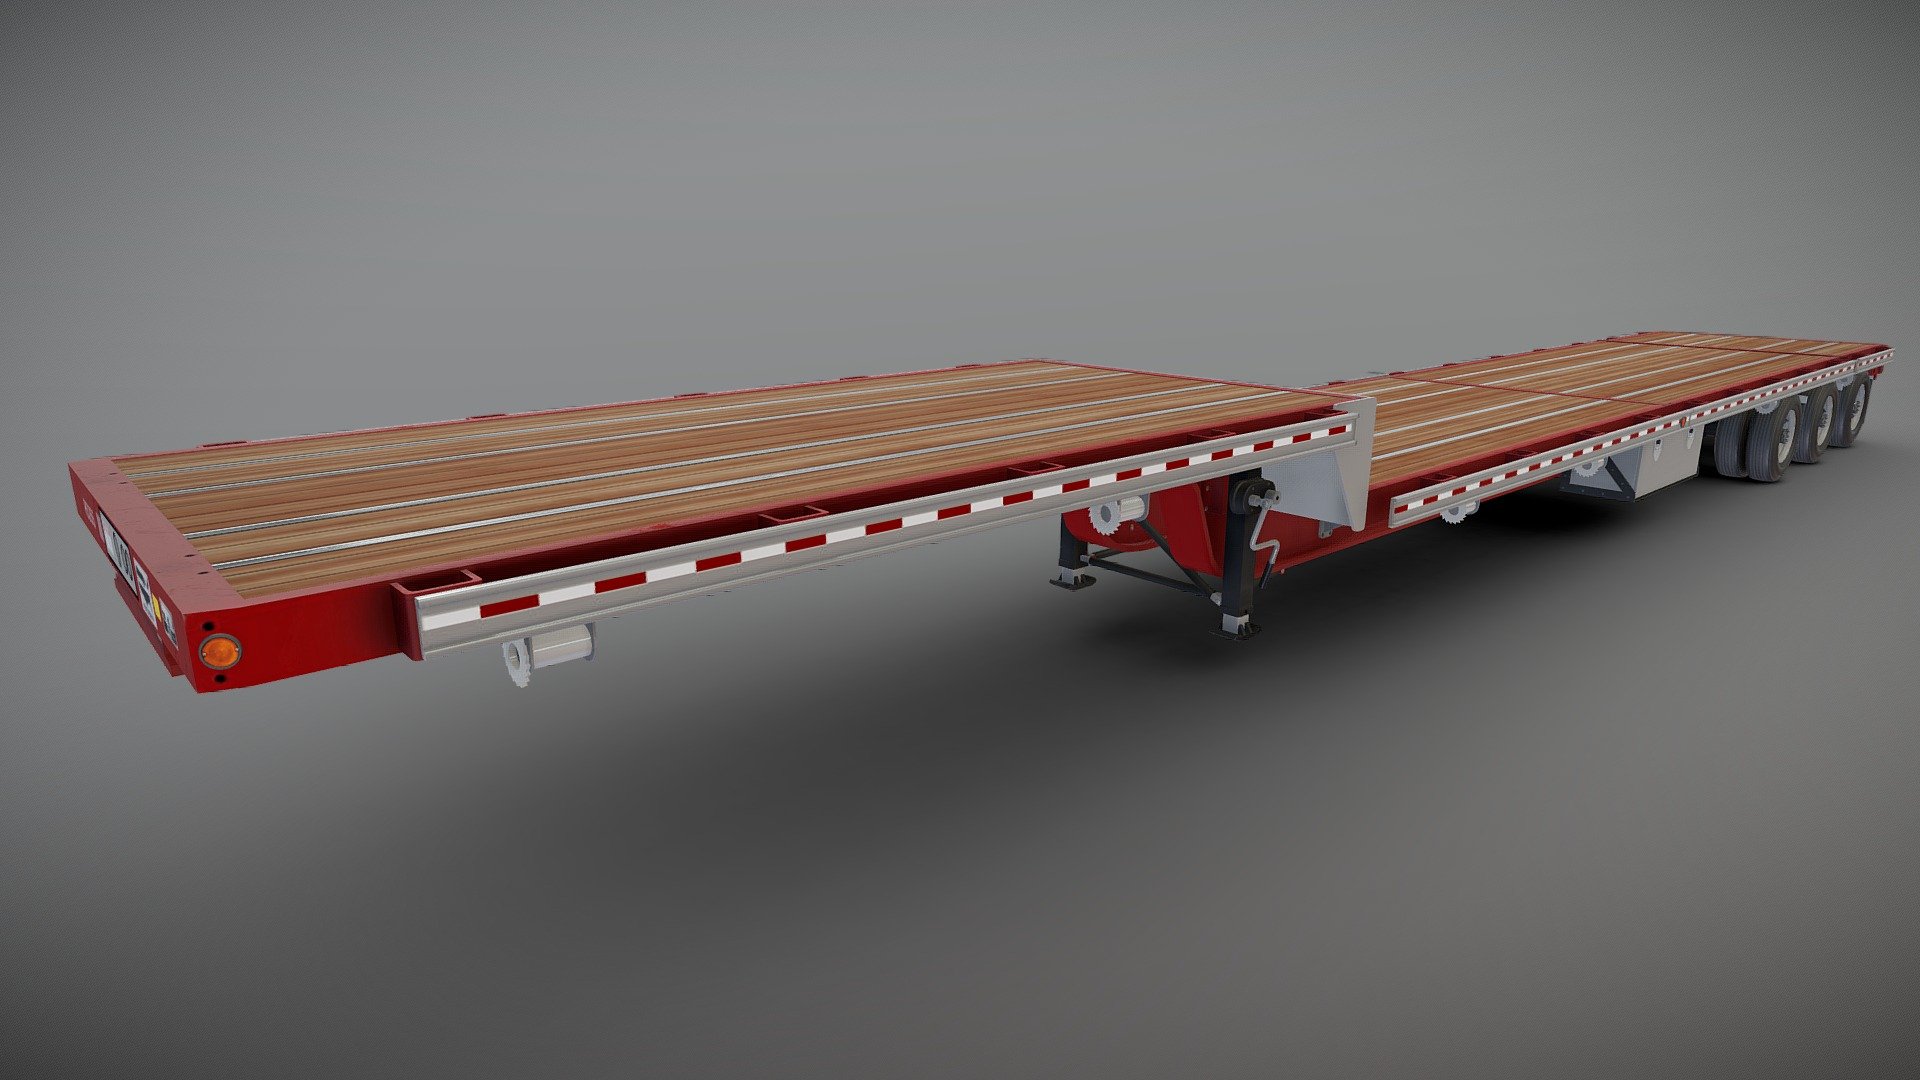 Dropdeck Trailer game ready model.

Full textured model with clean topology.

Two types of wheels.

Full model - 68604 tris 39515 verts

High detailed rims and tires, with PBR maps(Base_Color/Metallic/Normal/Roughness.png2048x2048 )

Three piant schemes - red, black and blue.

Original scale.

Lenght 20m , width 3m , height 3.1m.

Model ready for real-time apps, games, virtual reality and augmented reality.

Asset looks accuracy and realistic and become a good part of your project 3d model